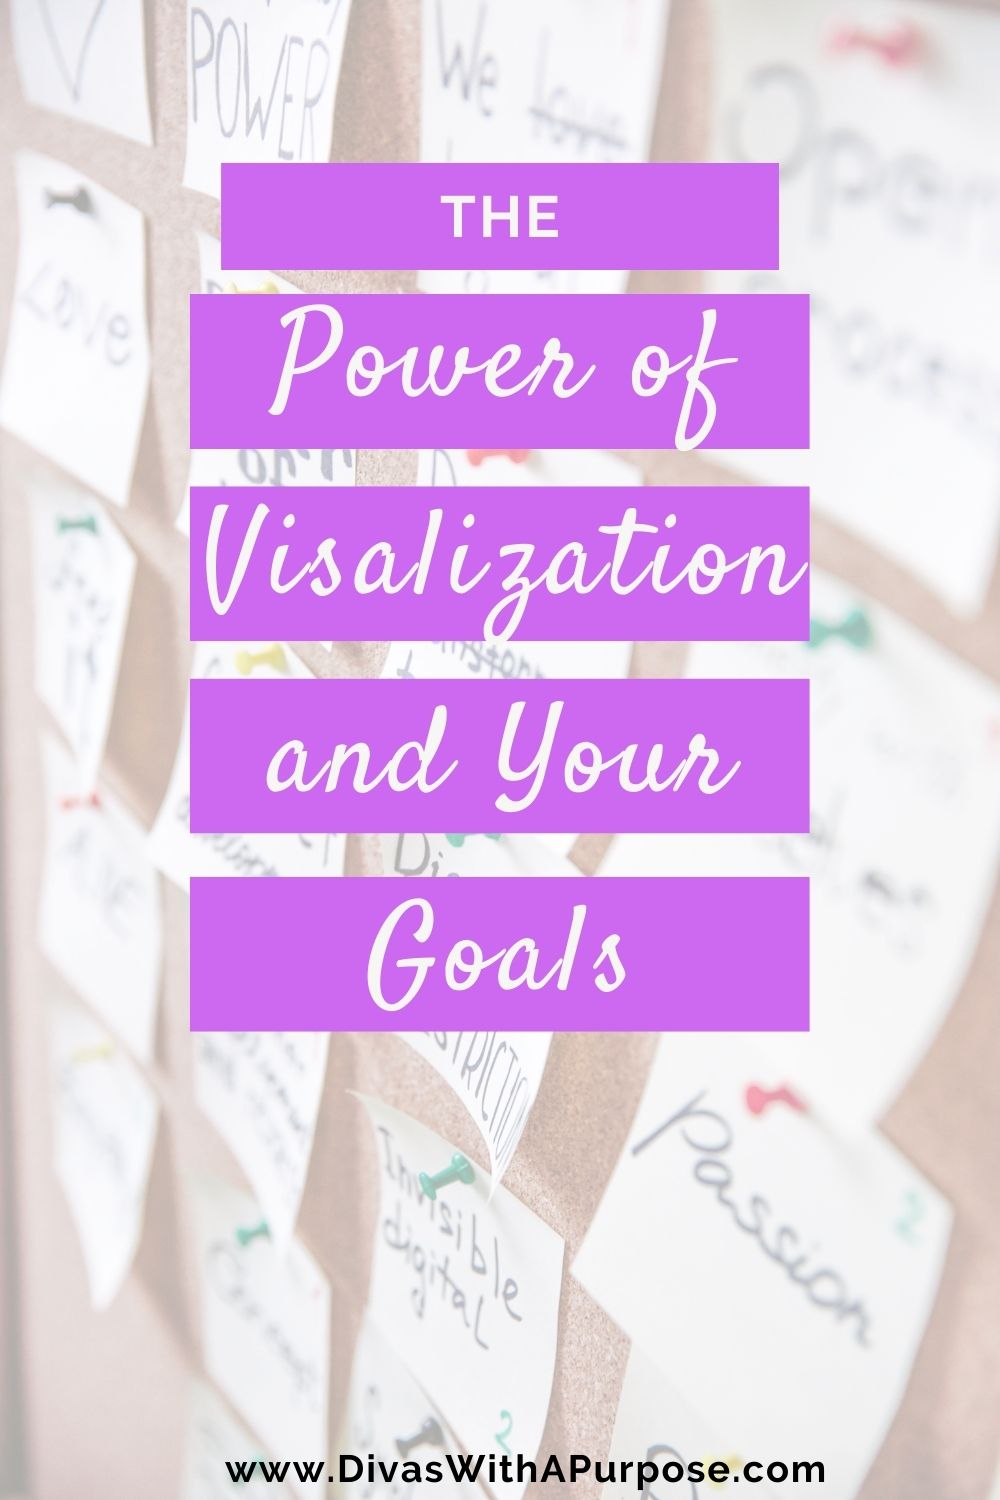 The power of visualization